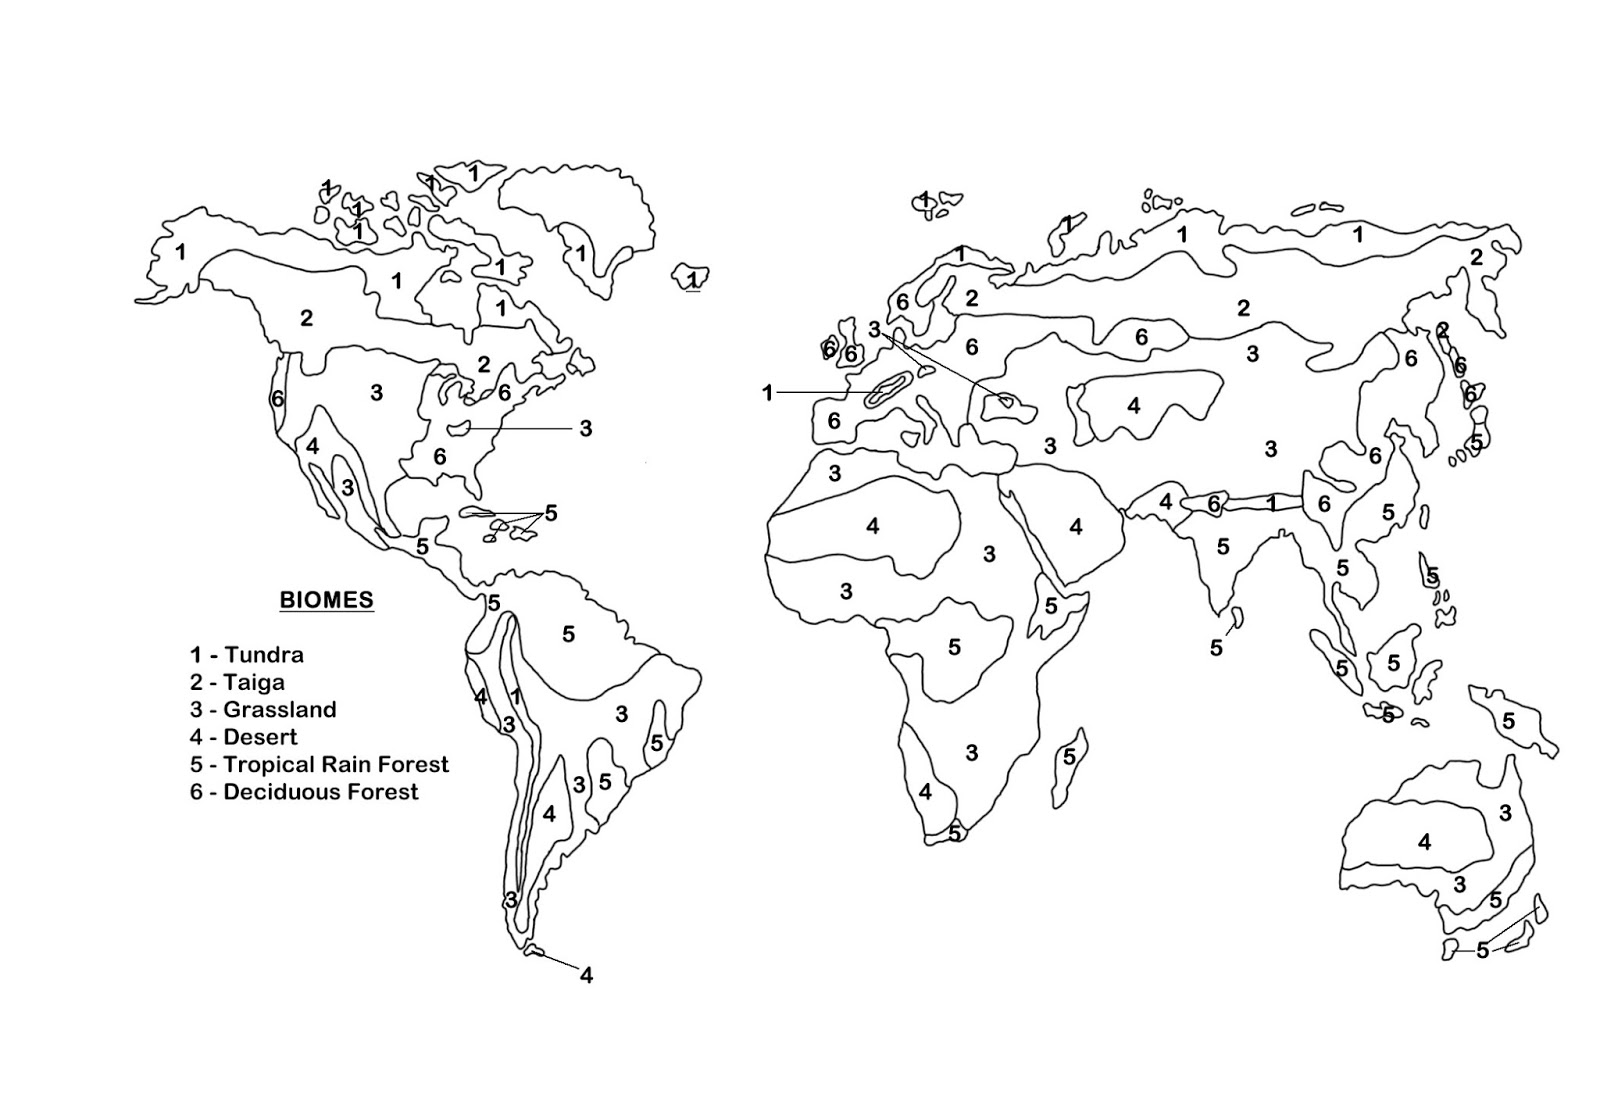 World Biome Map Coloring Worksheet Answers